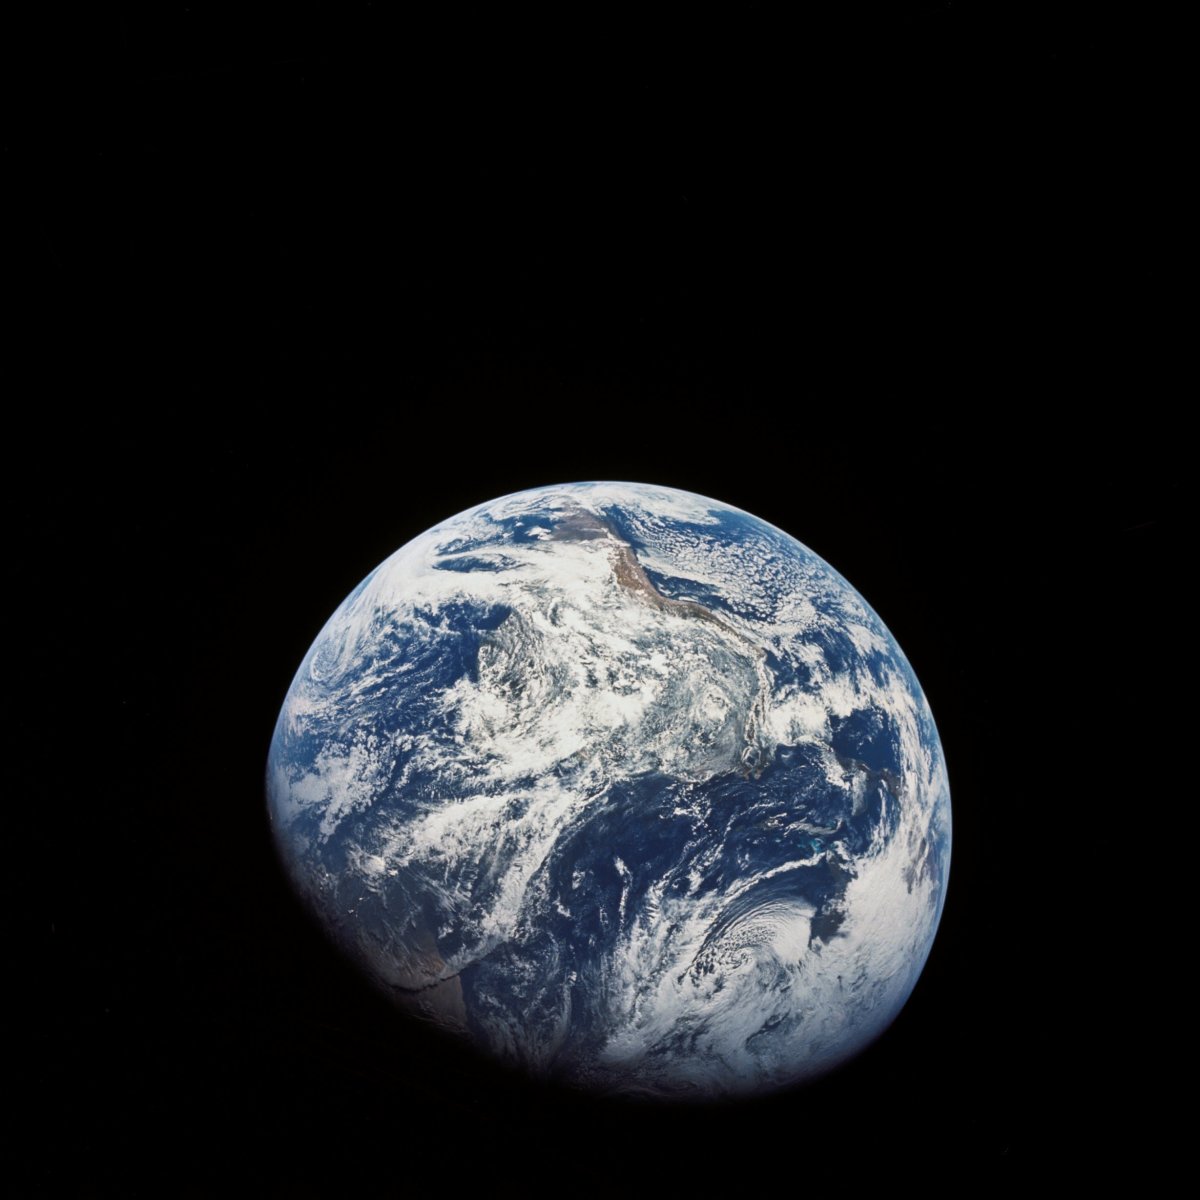 APOLLO 8 CREW SHOT THIS FIRST EVER PHOTO OF EARTH FROM DEEP SPACE